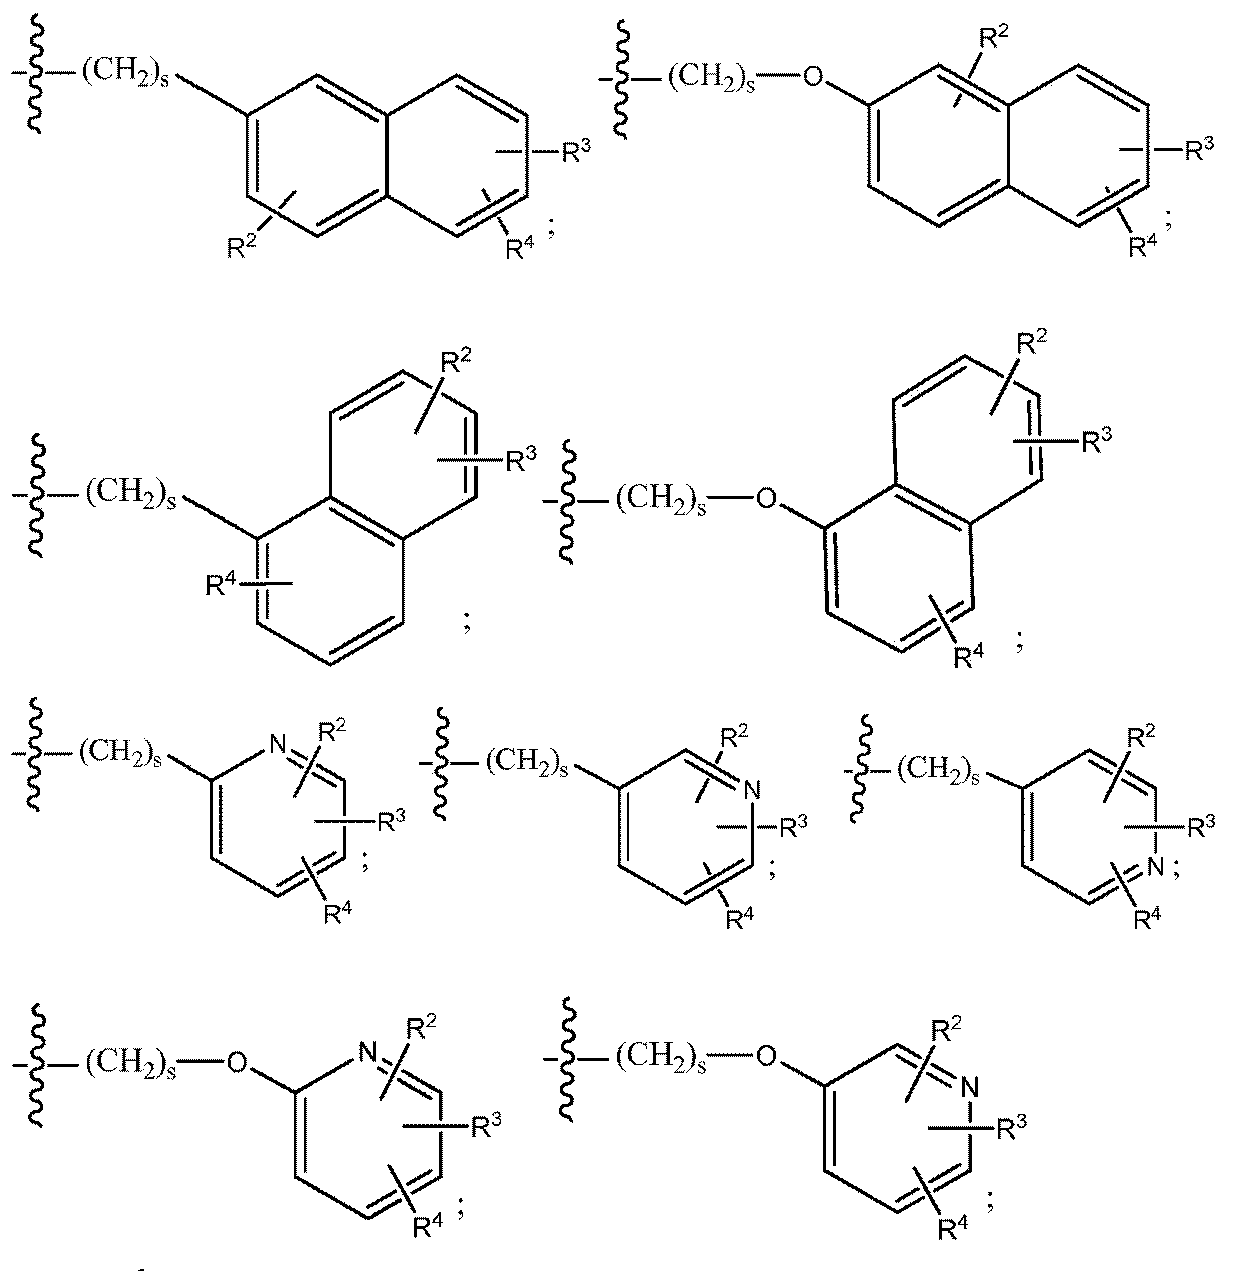 Arylalkyl-and aryloxyalkyl-substituted epithelial sodium channel blocking compounds